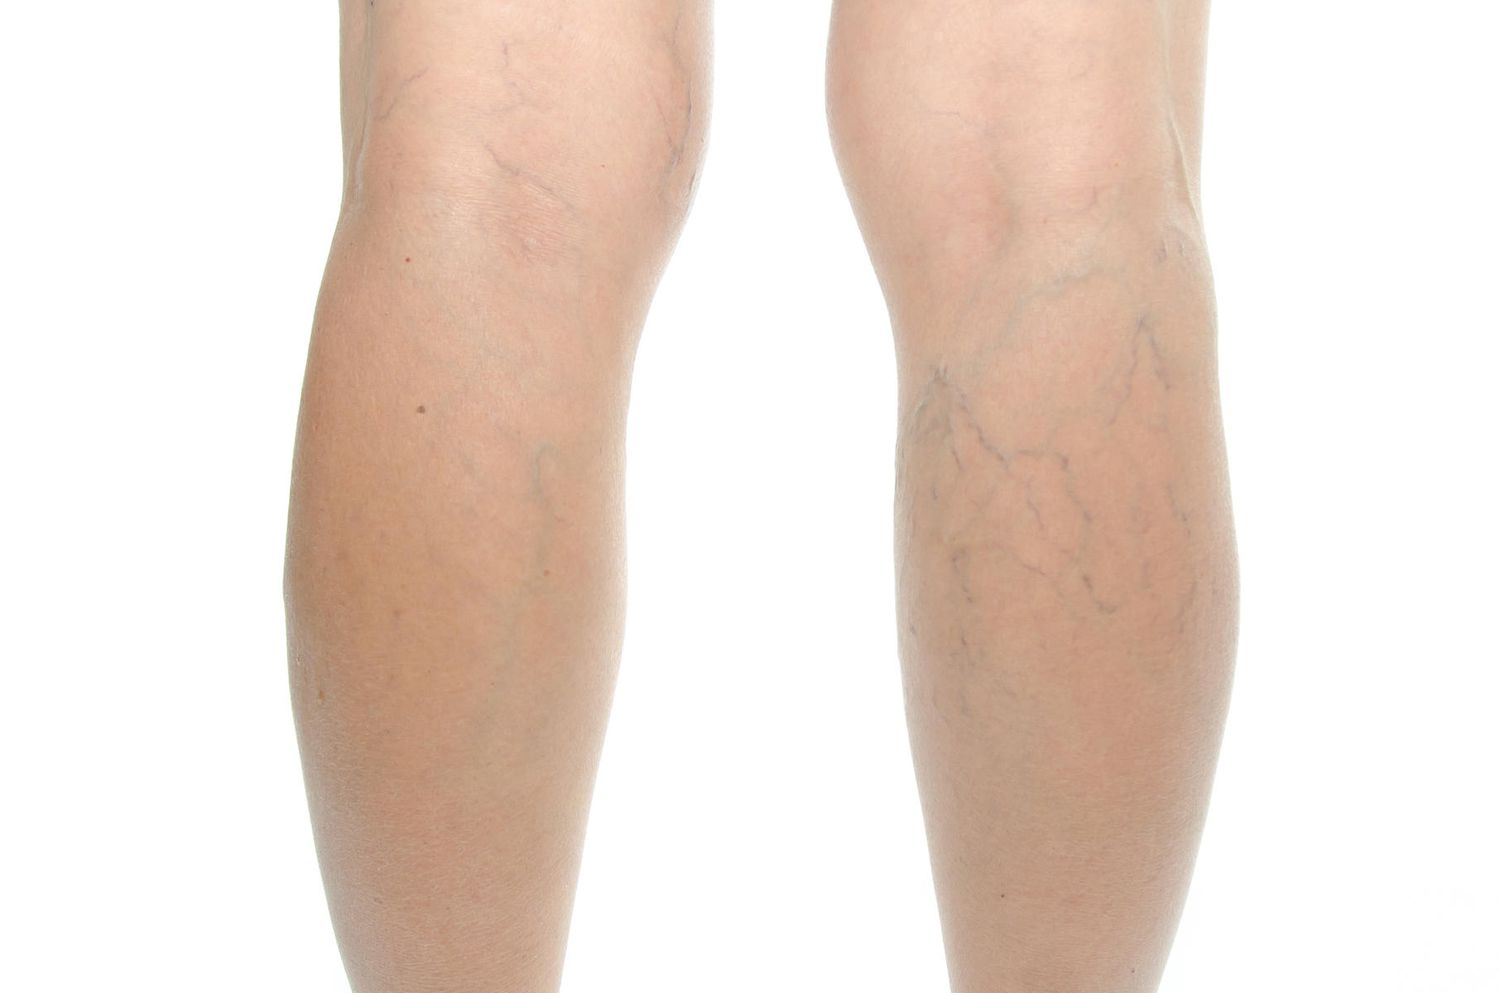 how common are varicose veins in pregnancy